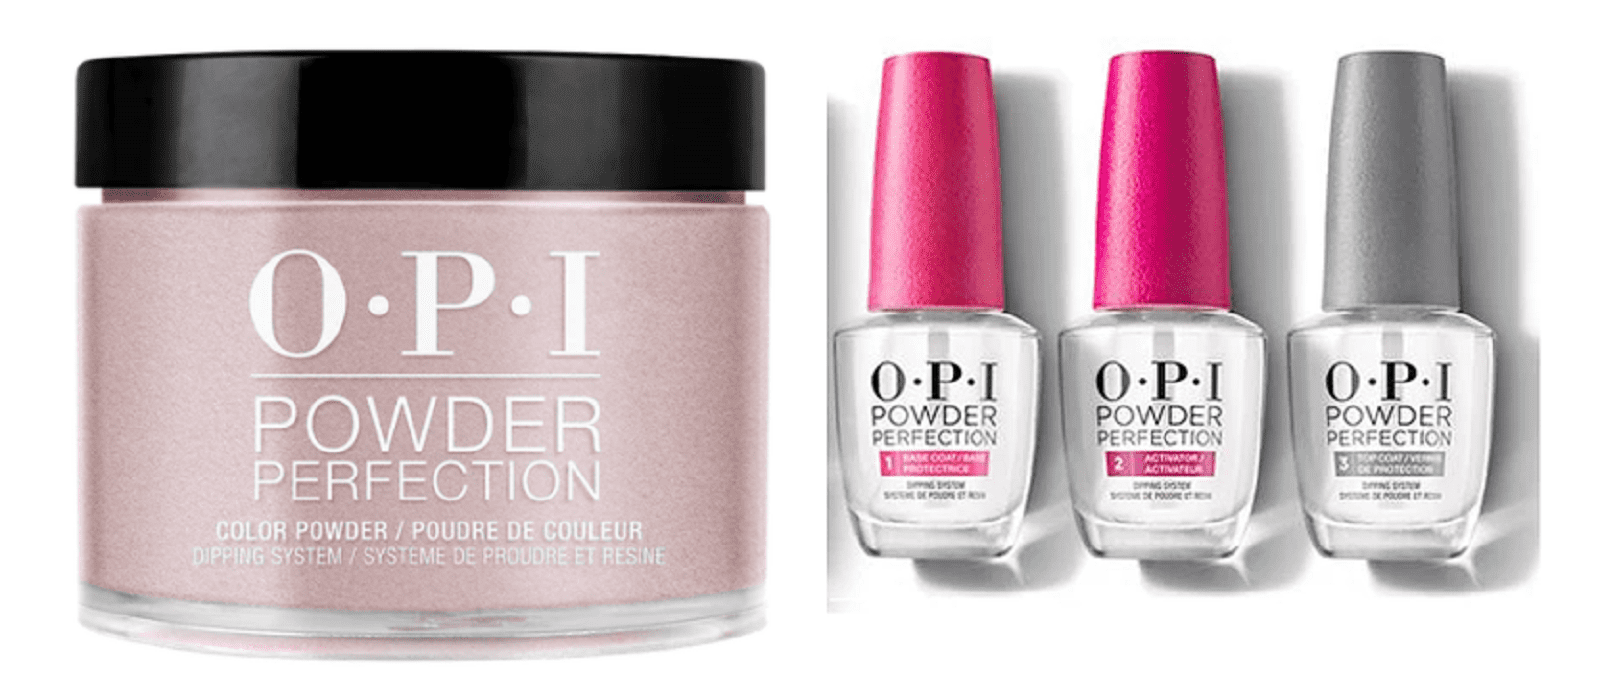 1. OPI Powder Perfection Nail Color - Spring Collection - wide 2